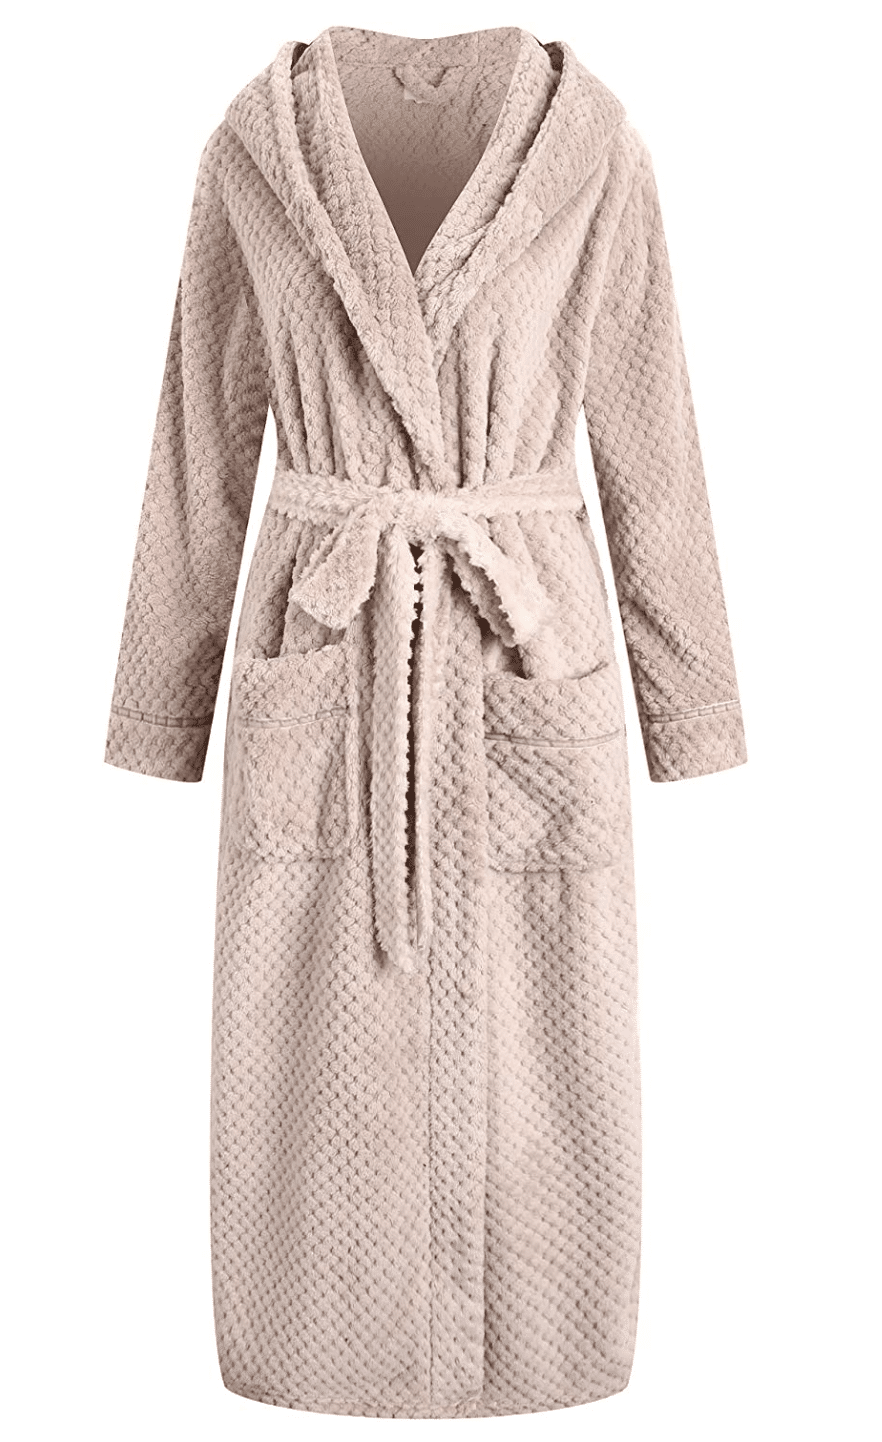 16 Perfect Mother's Day Gift Ideas chenille bath robe